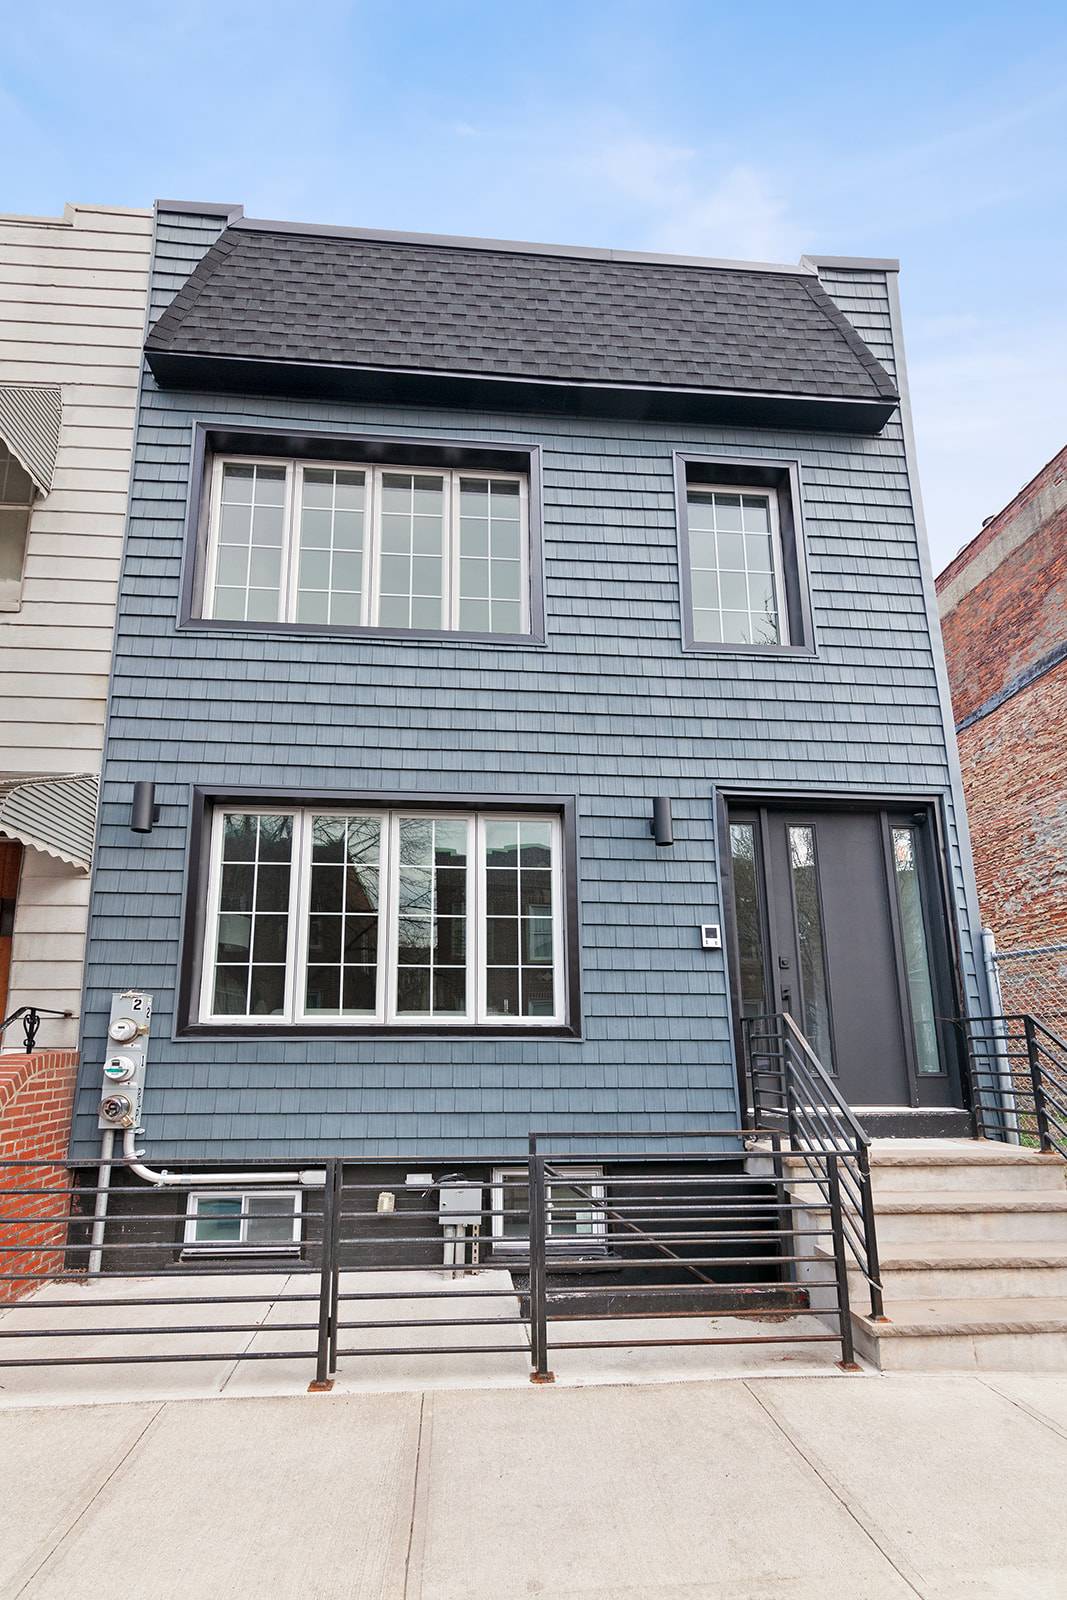 This masterfully gut renovated Bushwick two family shines with sun splashed designer interiors, private outdoor space and an ideal Brooklyn location.